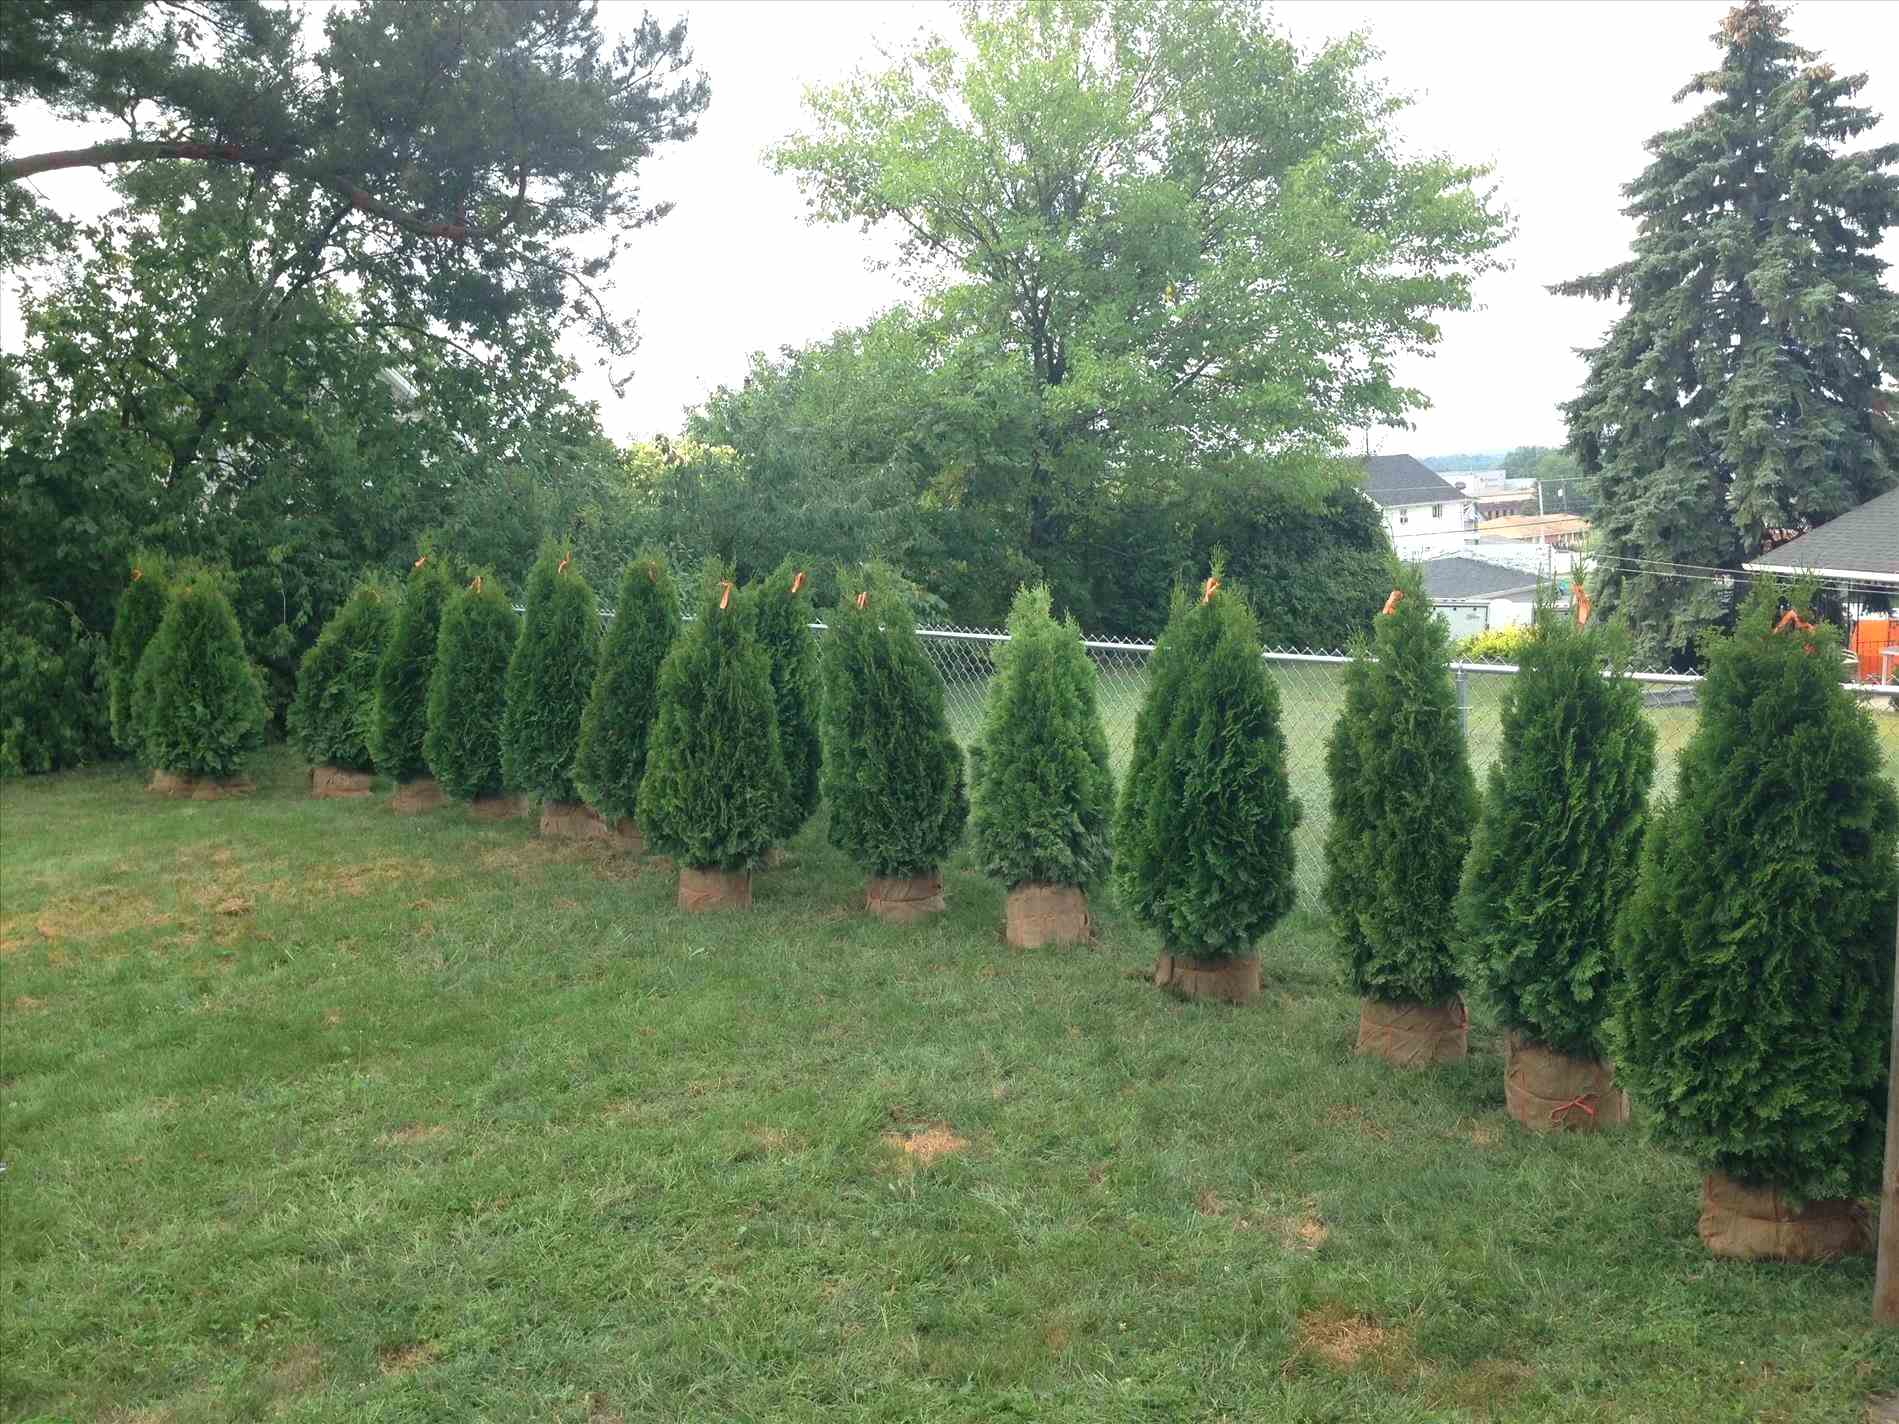 Shrub Fence Drivewy Planting Privacy Ideas Evergreen Hedge in size 1899 X 1424